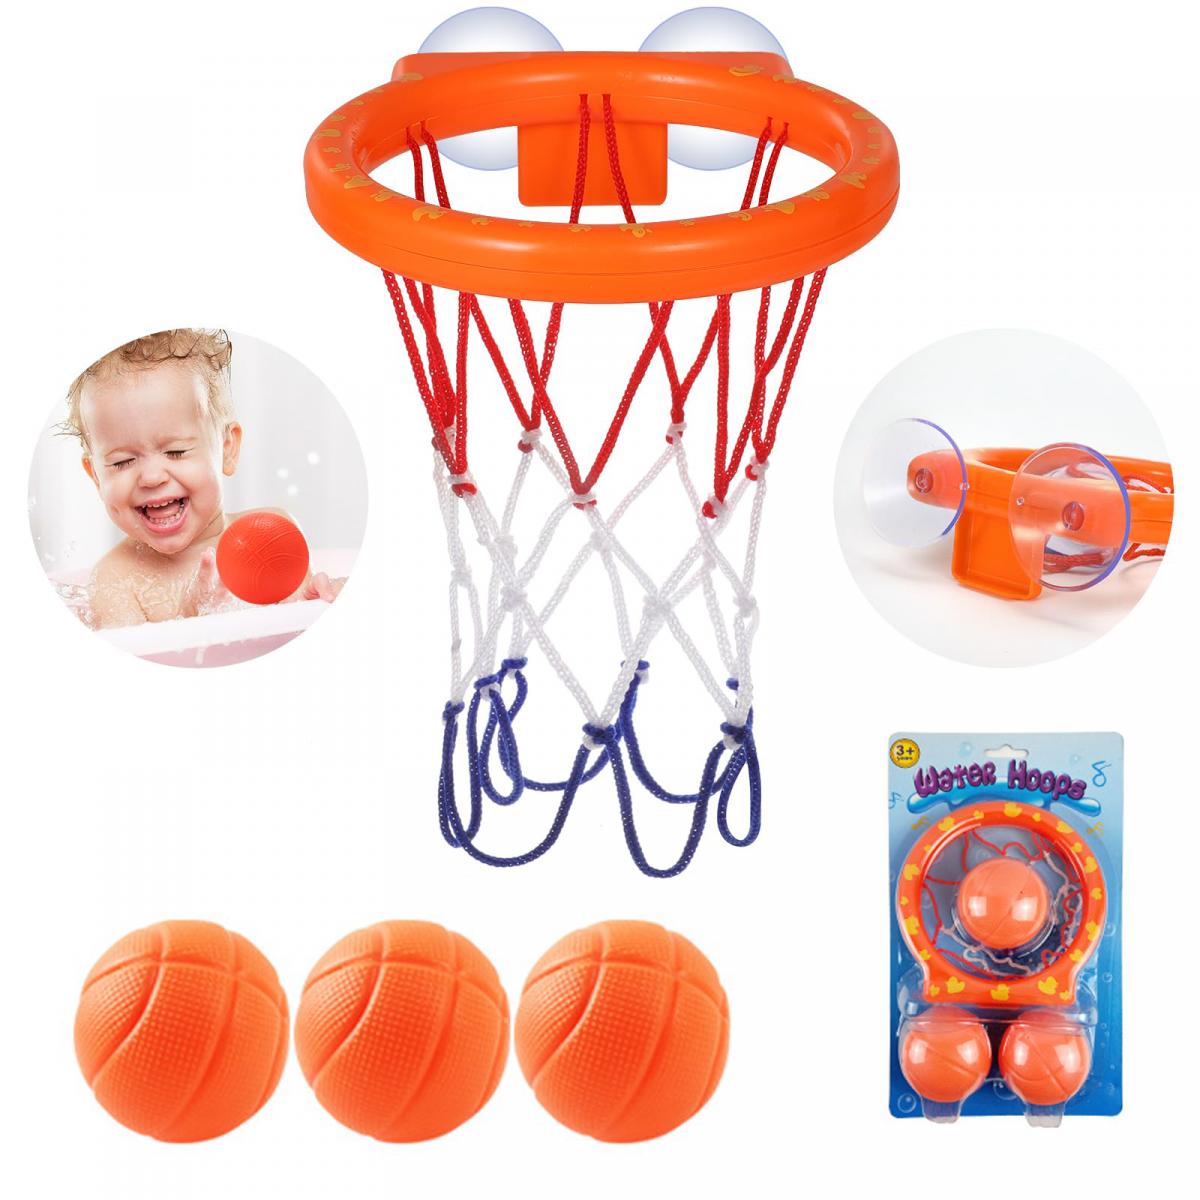 Bath toys, suction cup basketball hoop for boys and girls, and 3 soft ball set